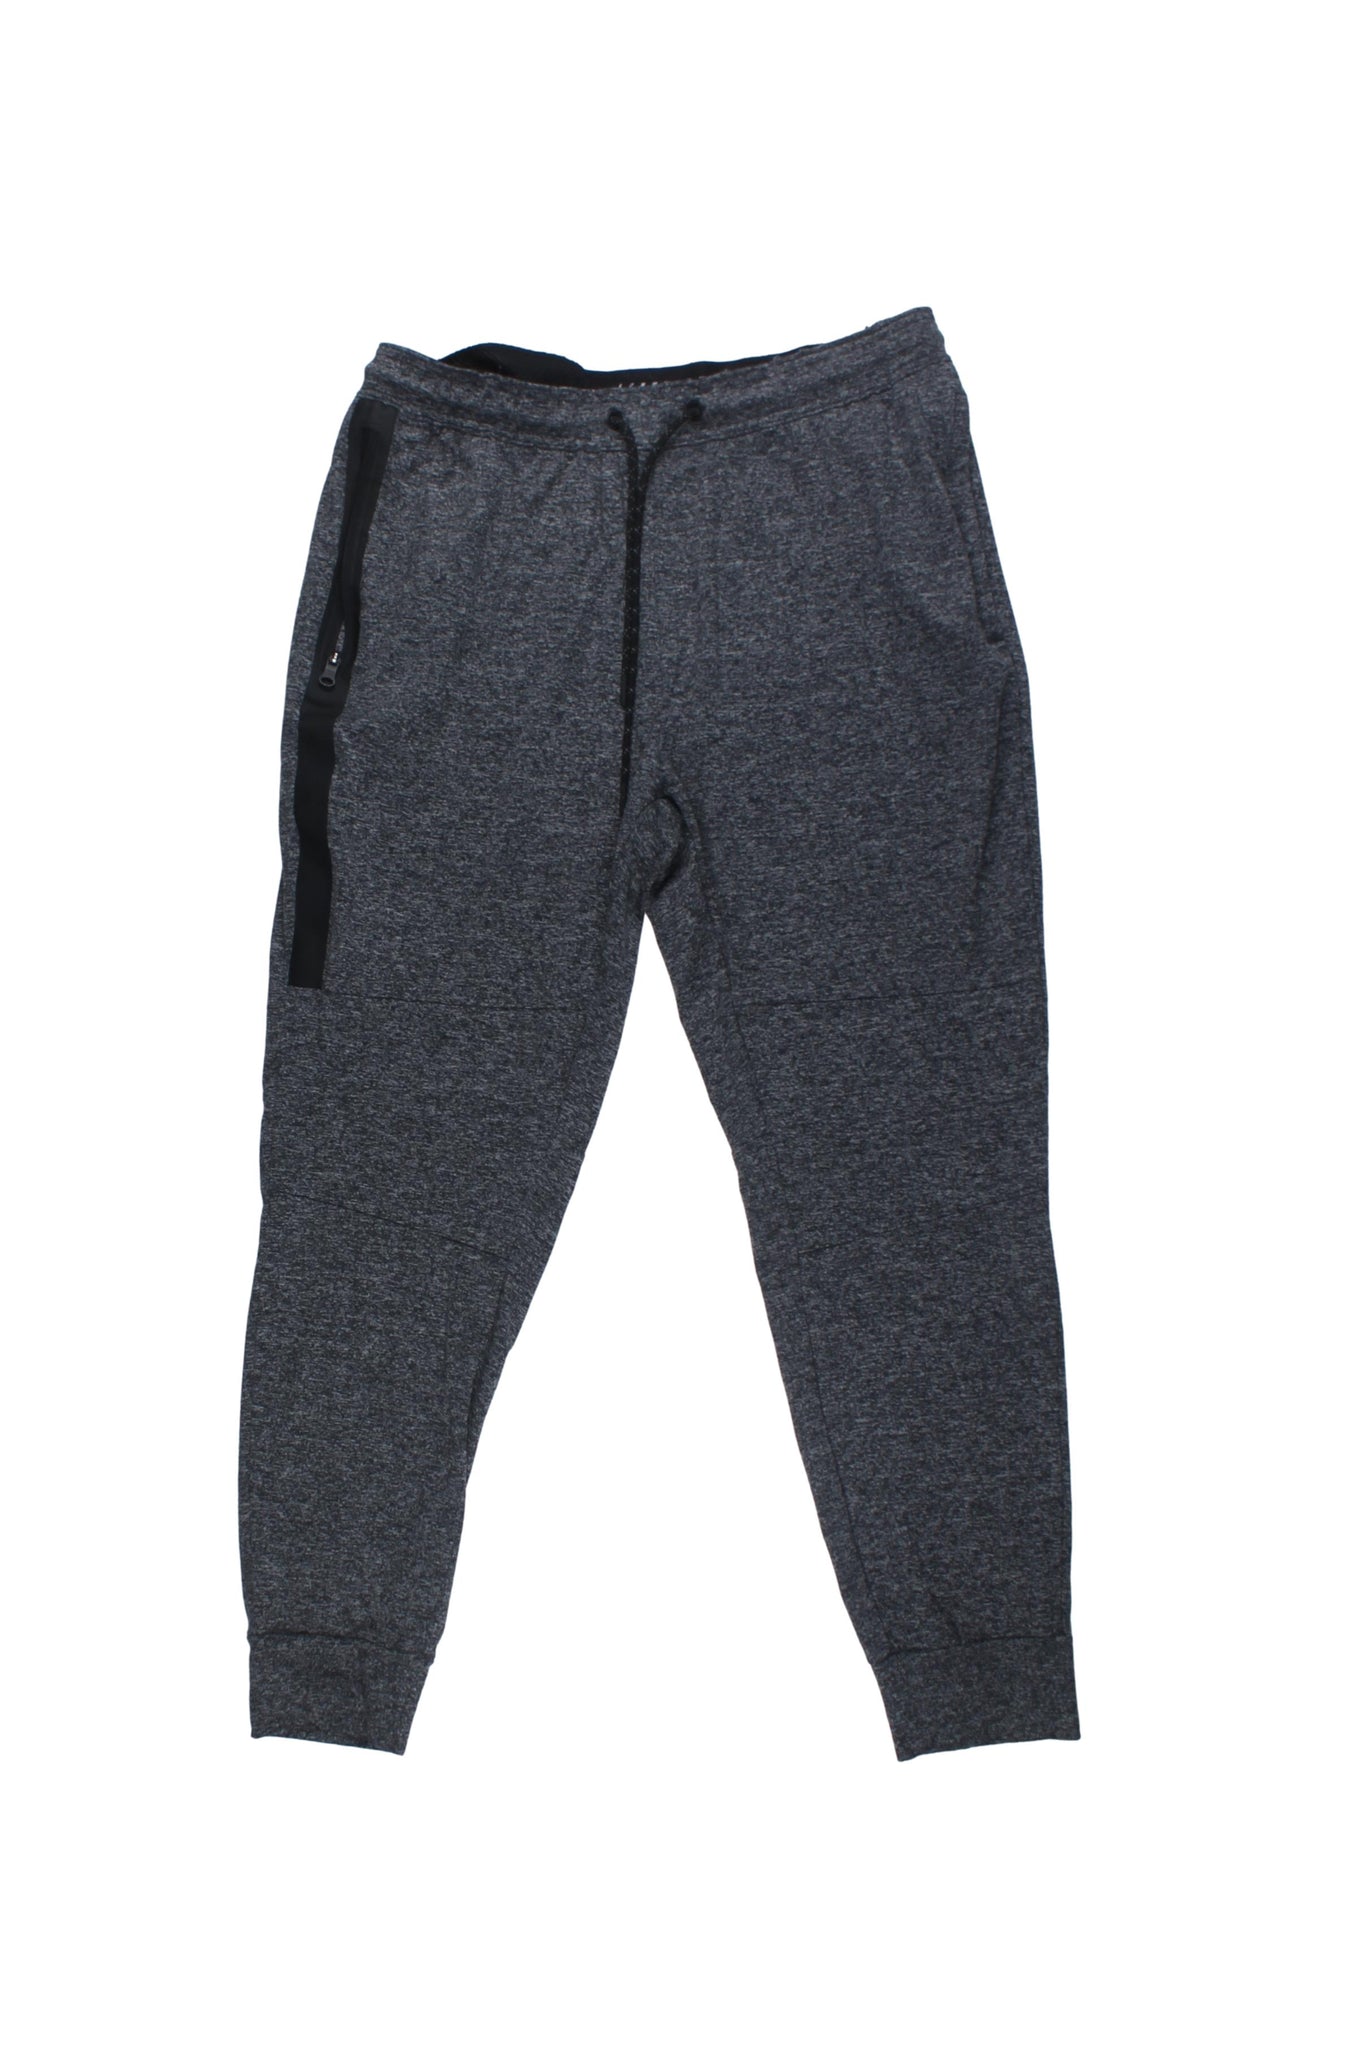 AMERICAN EAGLE OUTFITTERS - Pants Deportivos Grises Stretch